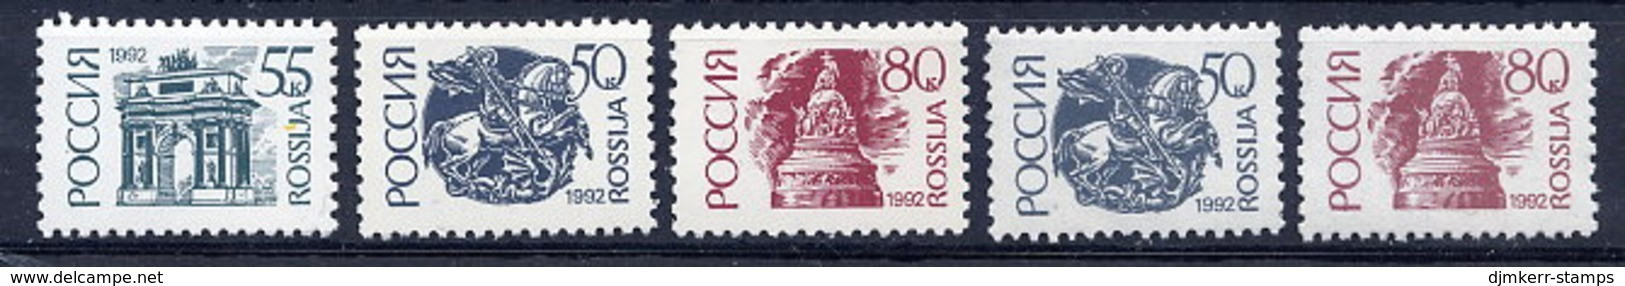 RUSSIAN FEDERATION 1992 Definitive 50, 55 And 80 K. On Chalky And Ordinary Papers MNH / ** .  Michel 260, 261-62v+w - Ongebruikt